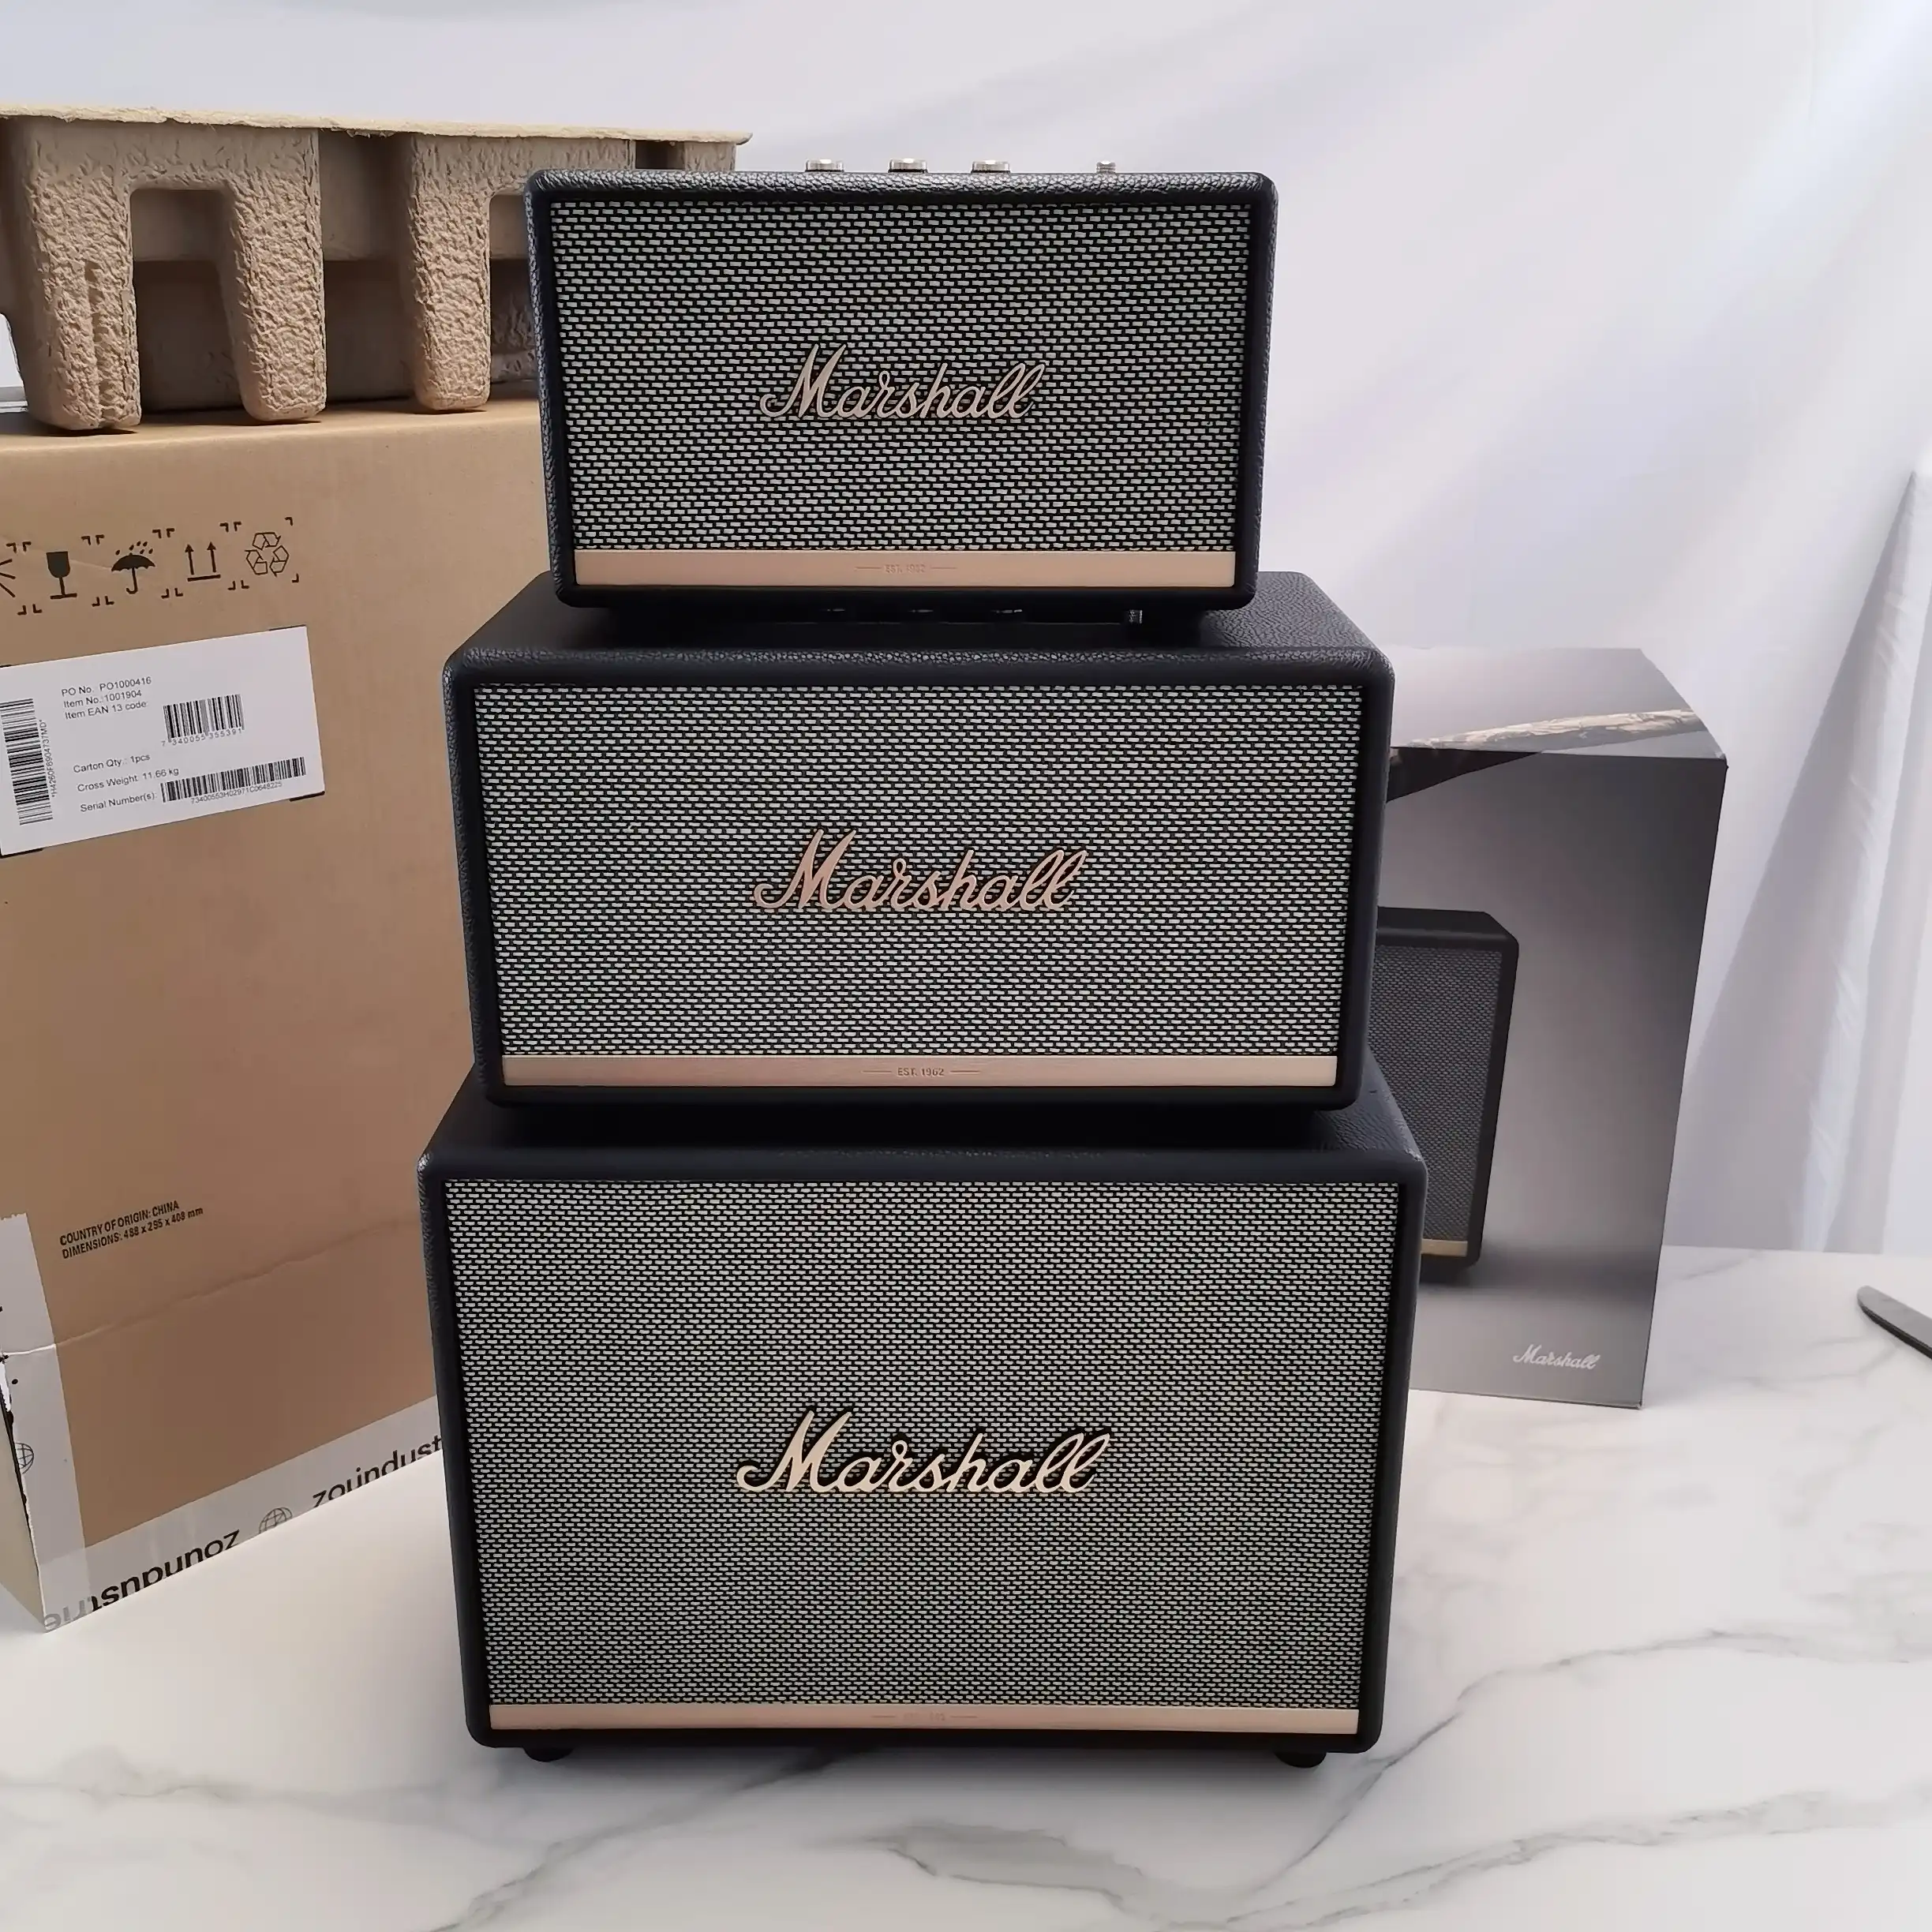 Acton II, Stanmore II, Woburn II : Marshall renouvelle ses enceintes  Bluetooth - CNET France